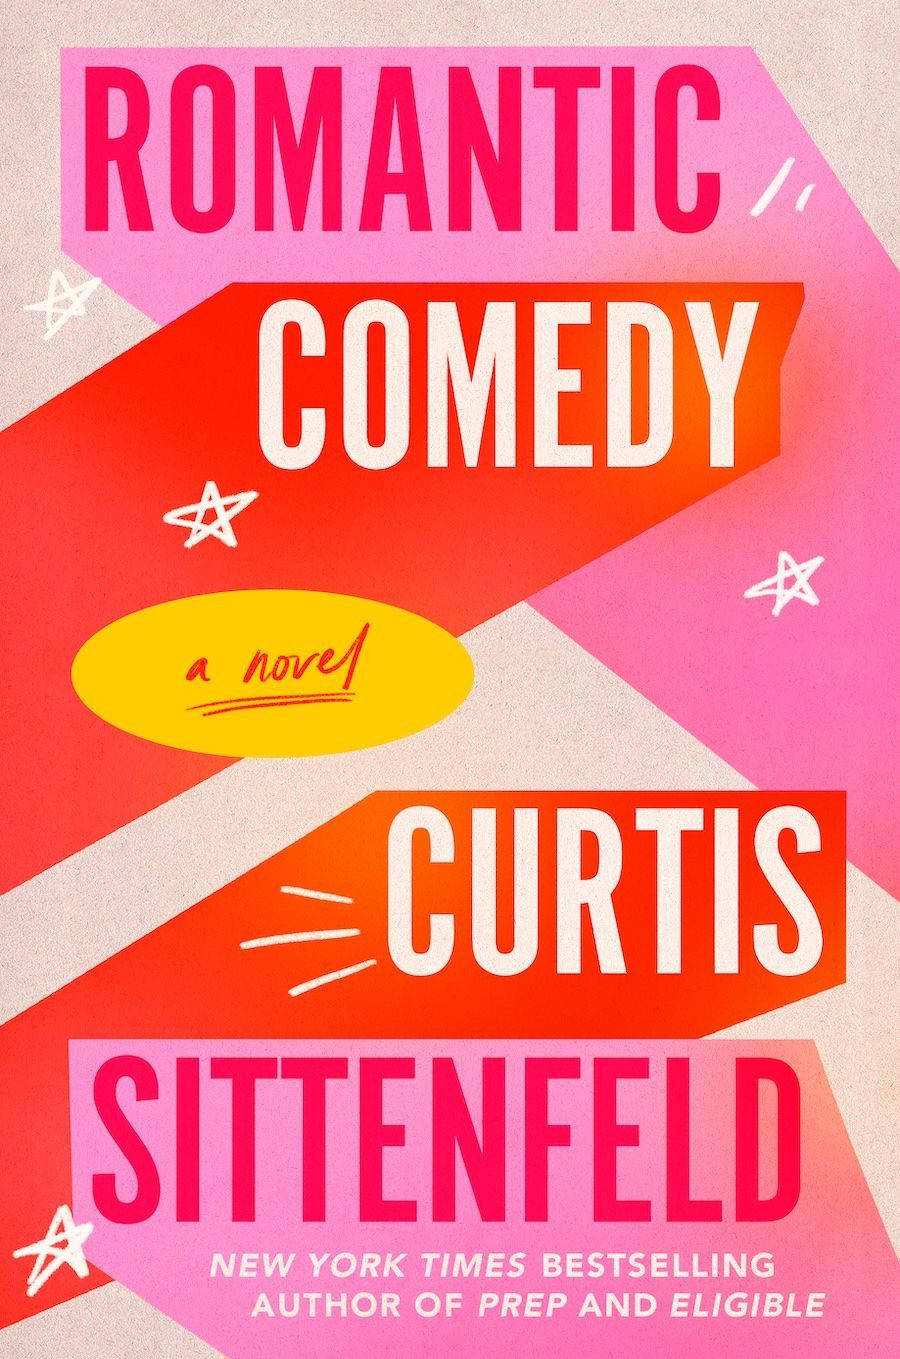 'Romantic Comedy' by Curtis Sittenfeld